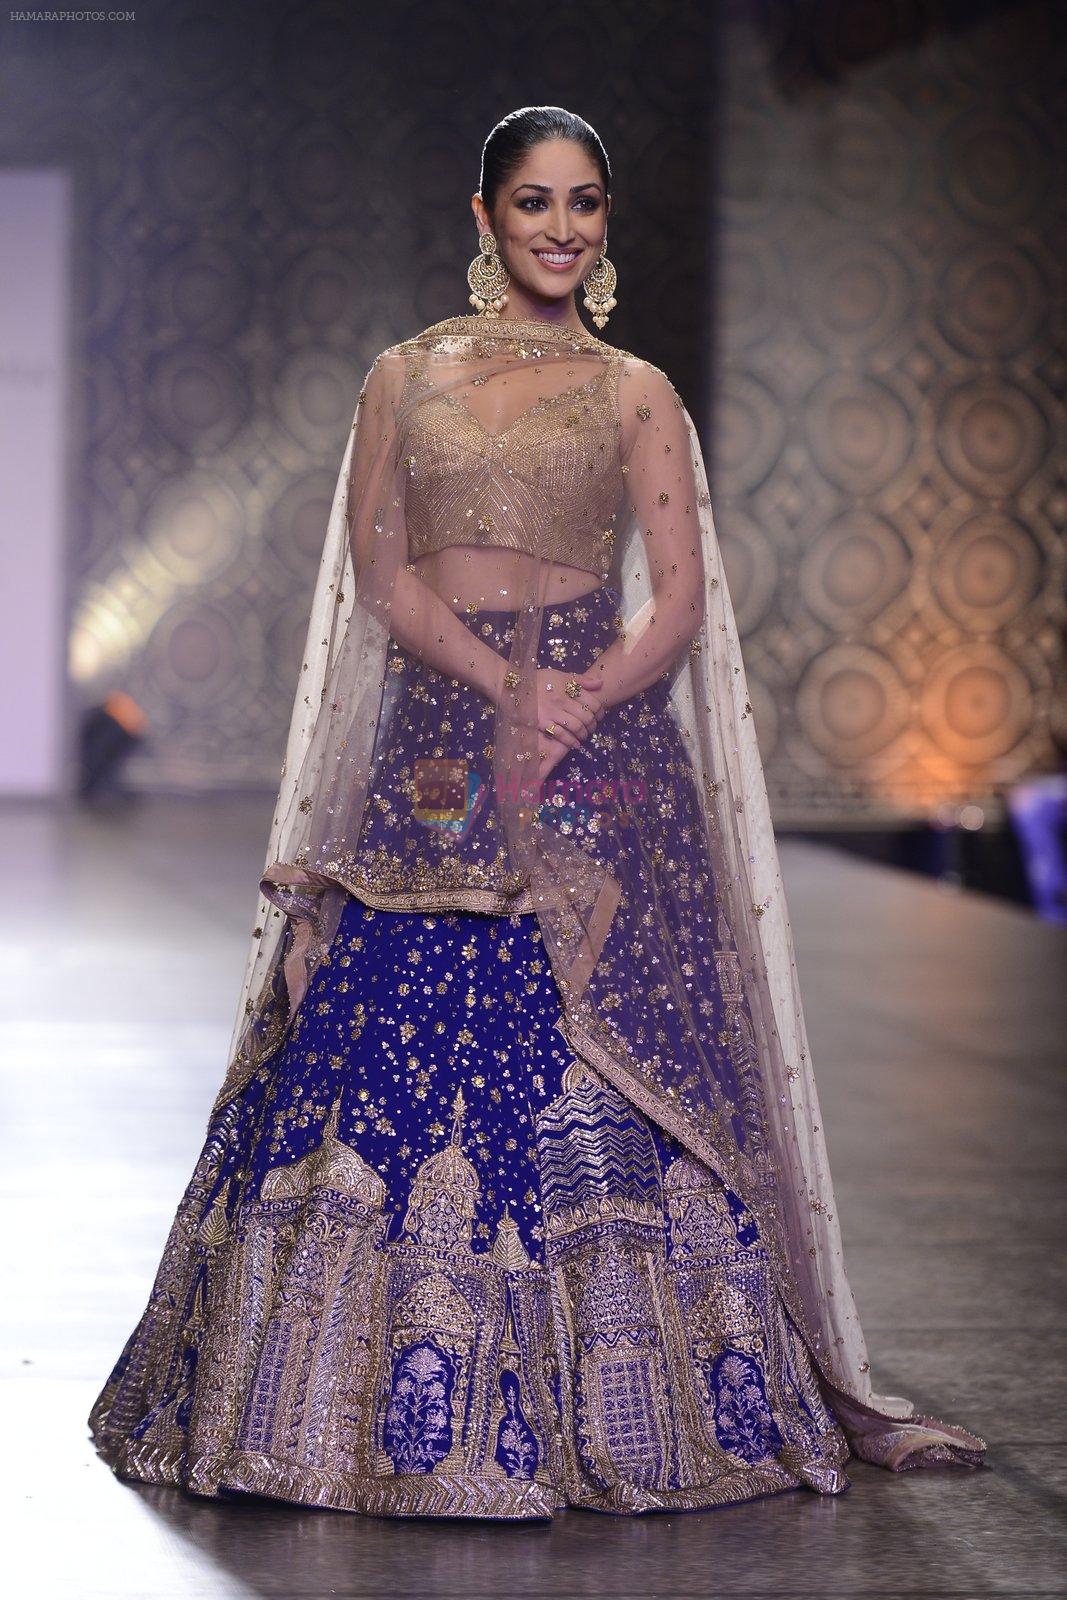 Yami Gautam walks the ramp for Rimple and Harpreet Narula at the FDCI India Couture Week 2016 on 22 July 2016